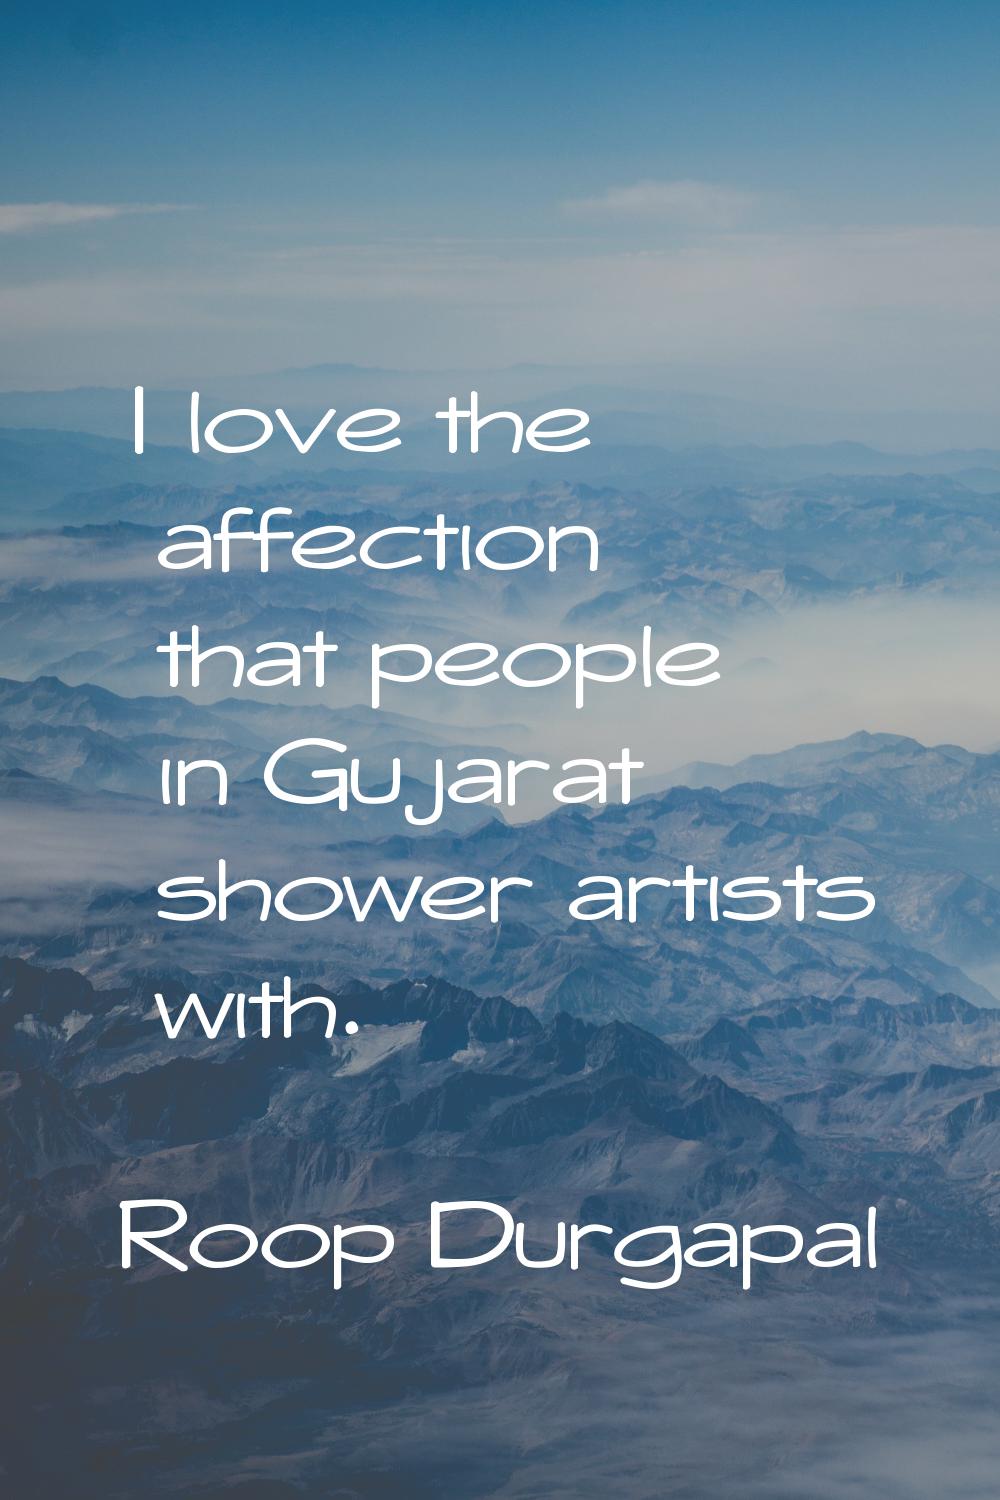 I love the affection that people in Gujarat shower artists with.